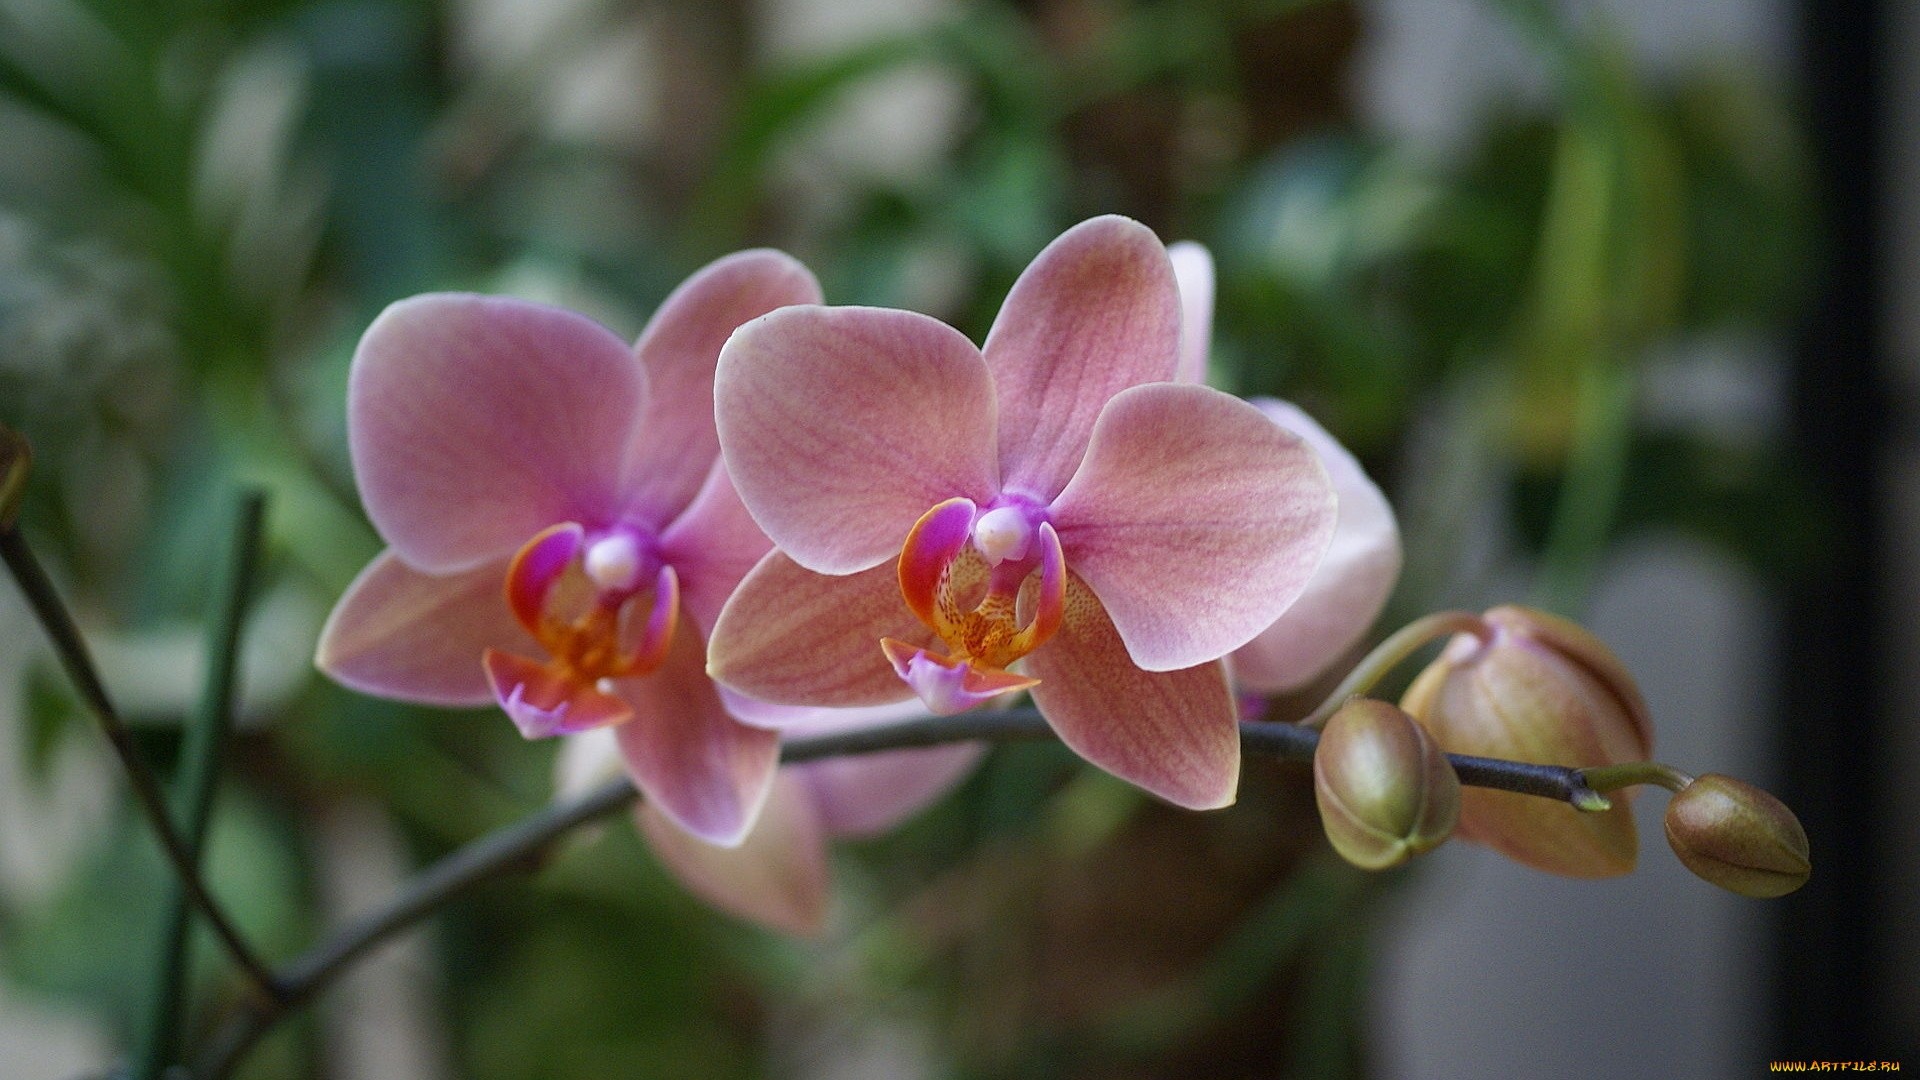 Orchid Wallpaper for pc